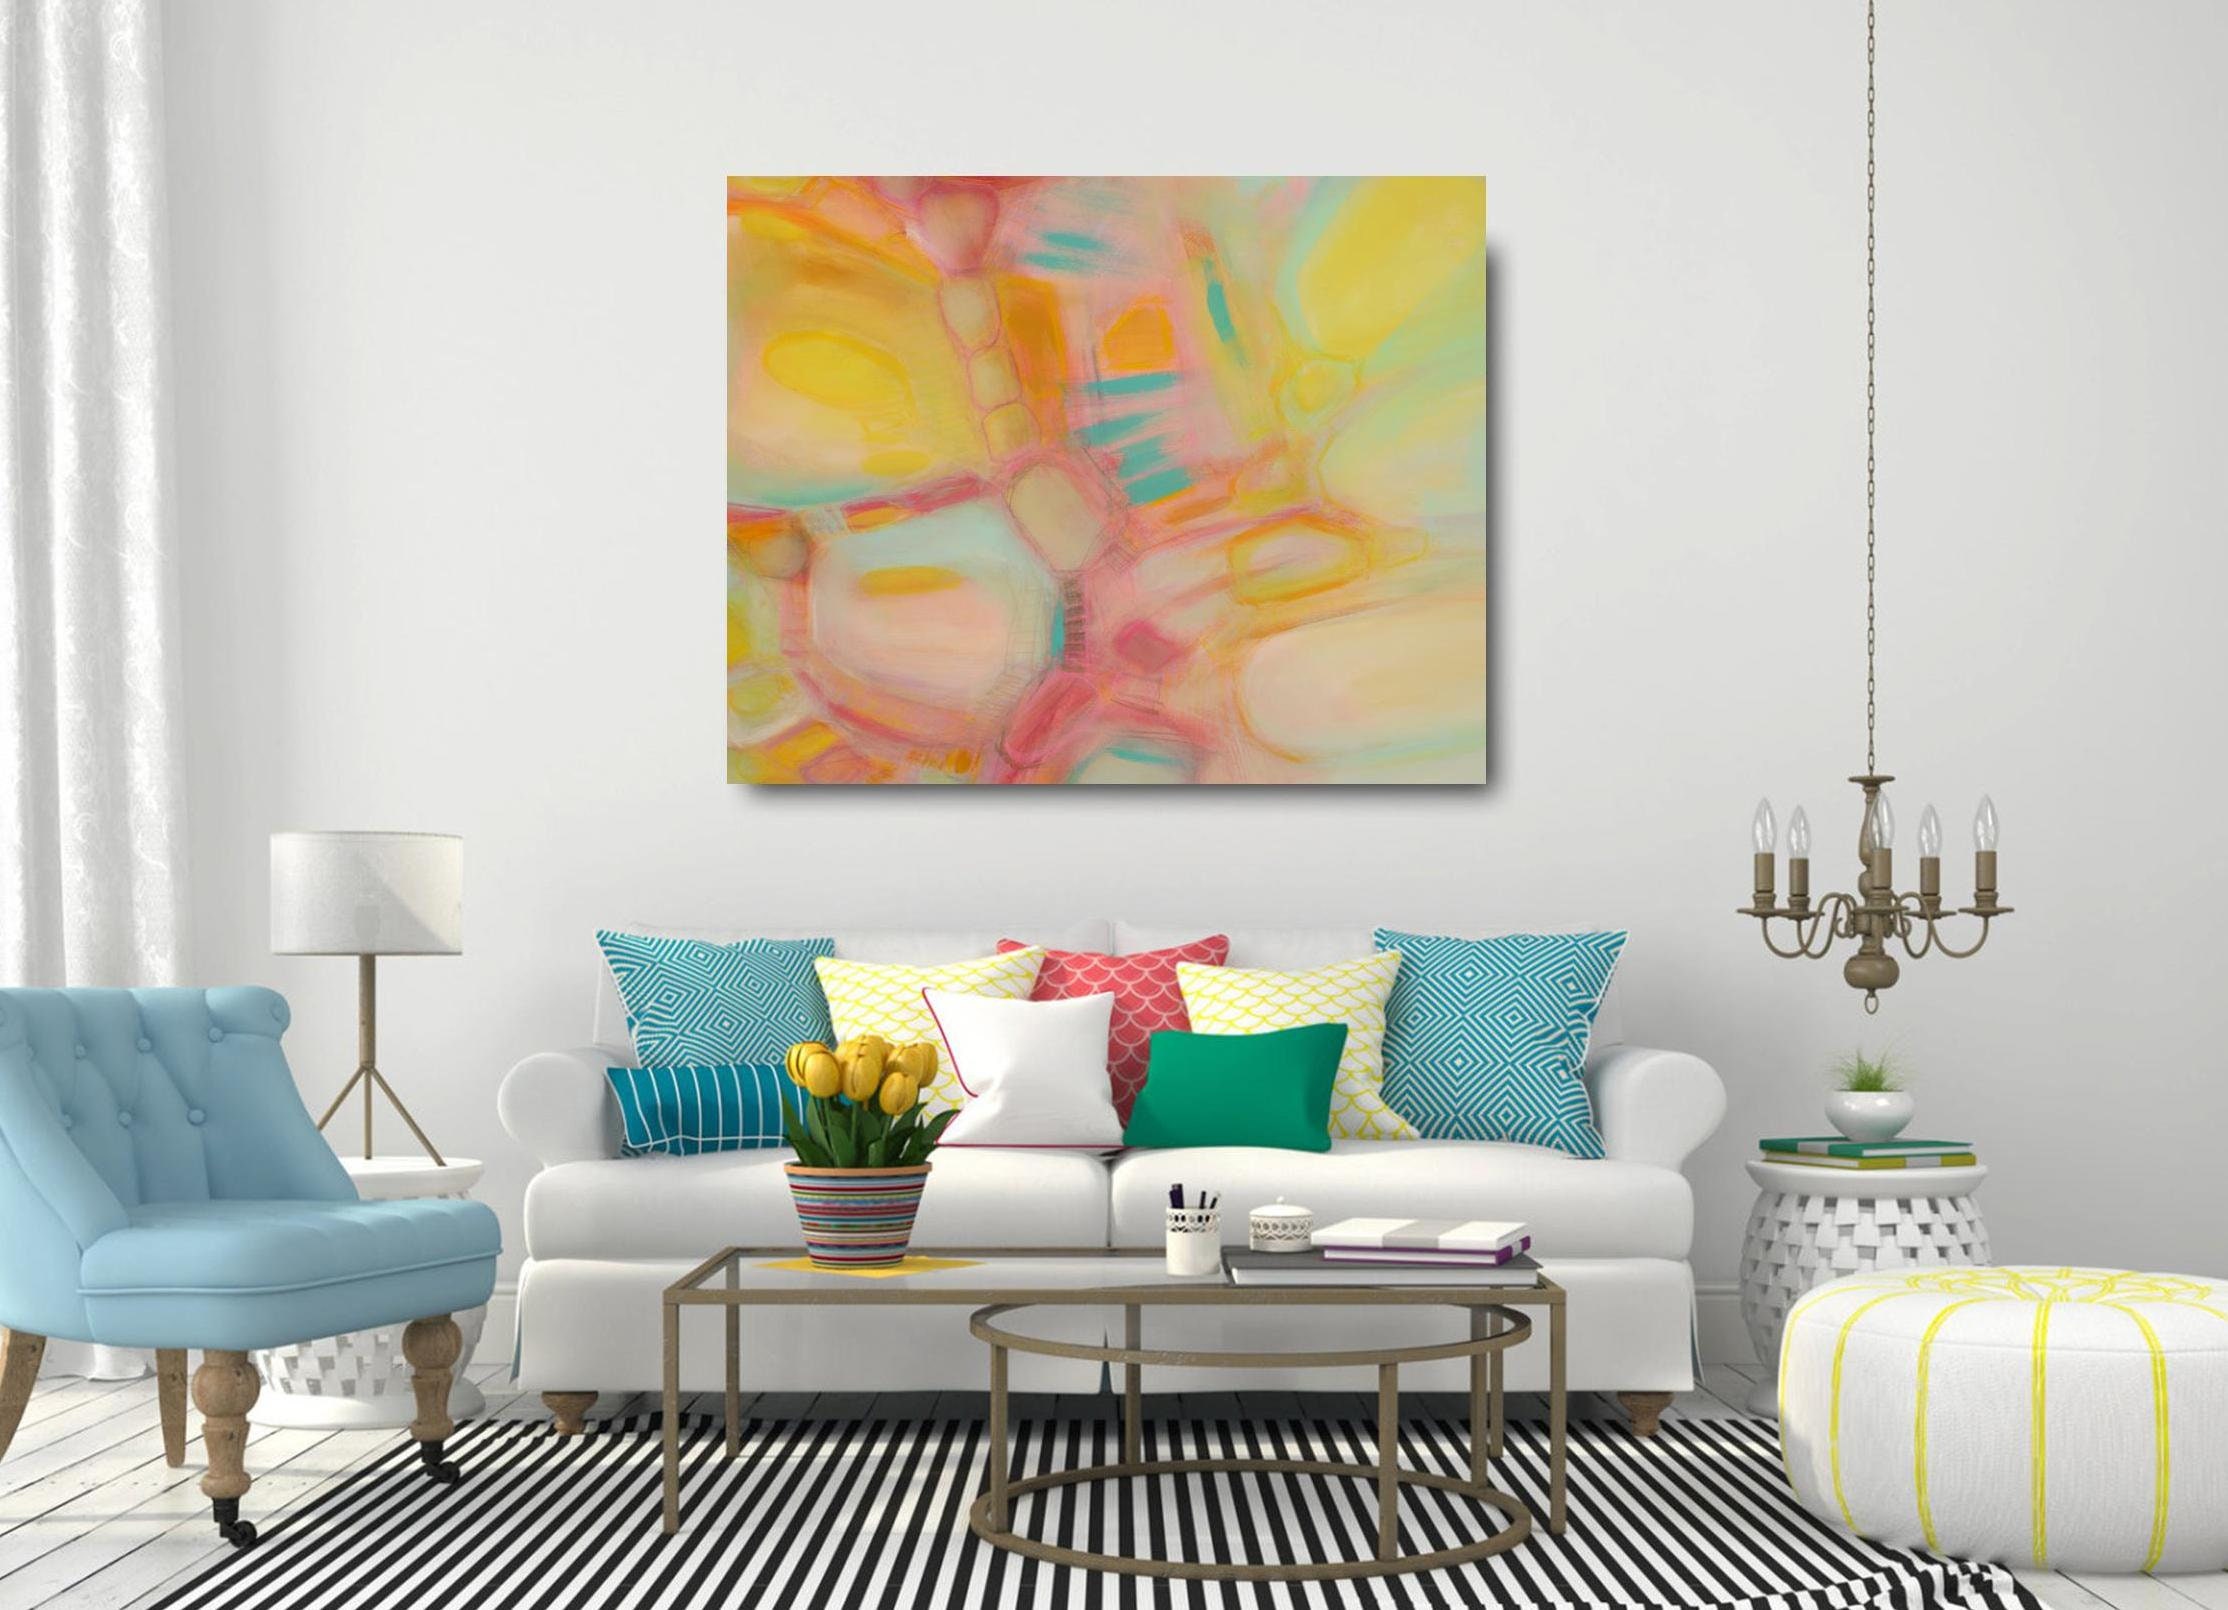 Pastel Yellow Large Abstract Wall Art Print Baby Room Soft Colors Decor Girls Bedroom Wall Decor Etsy Canvas Living Room Art